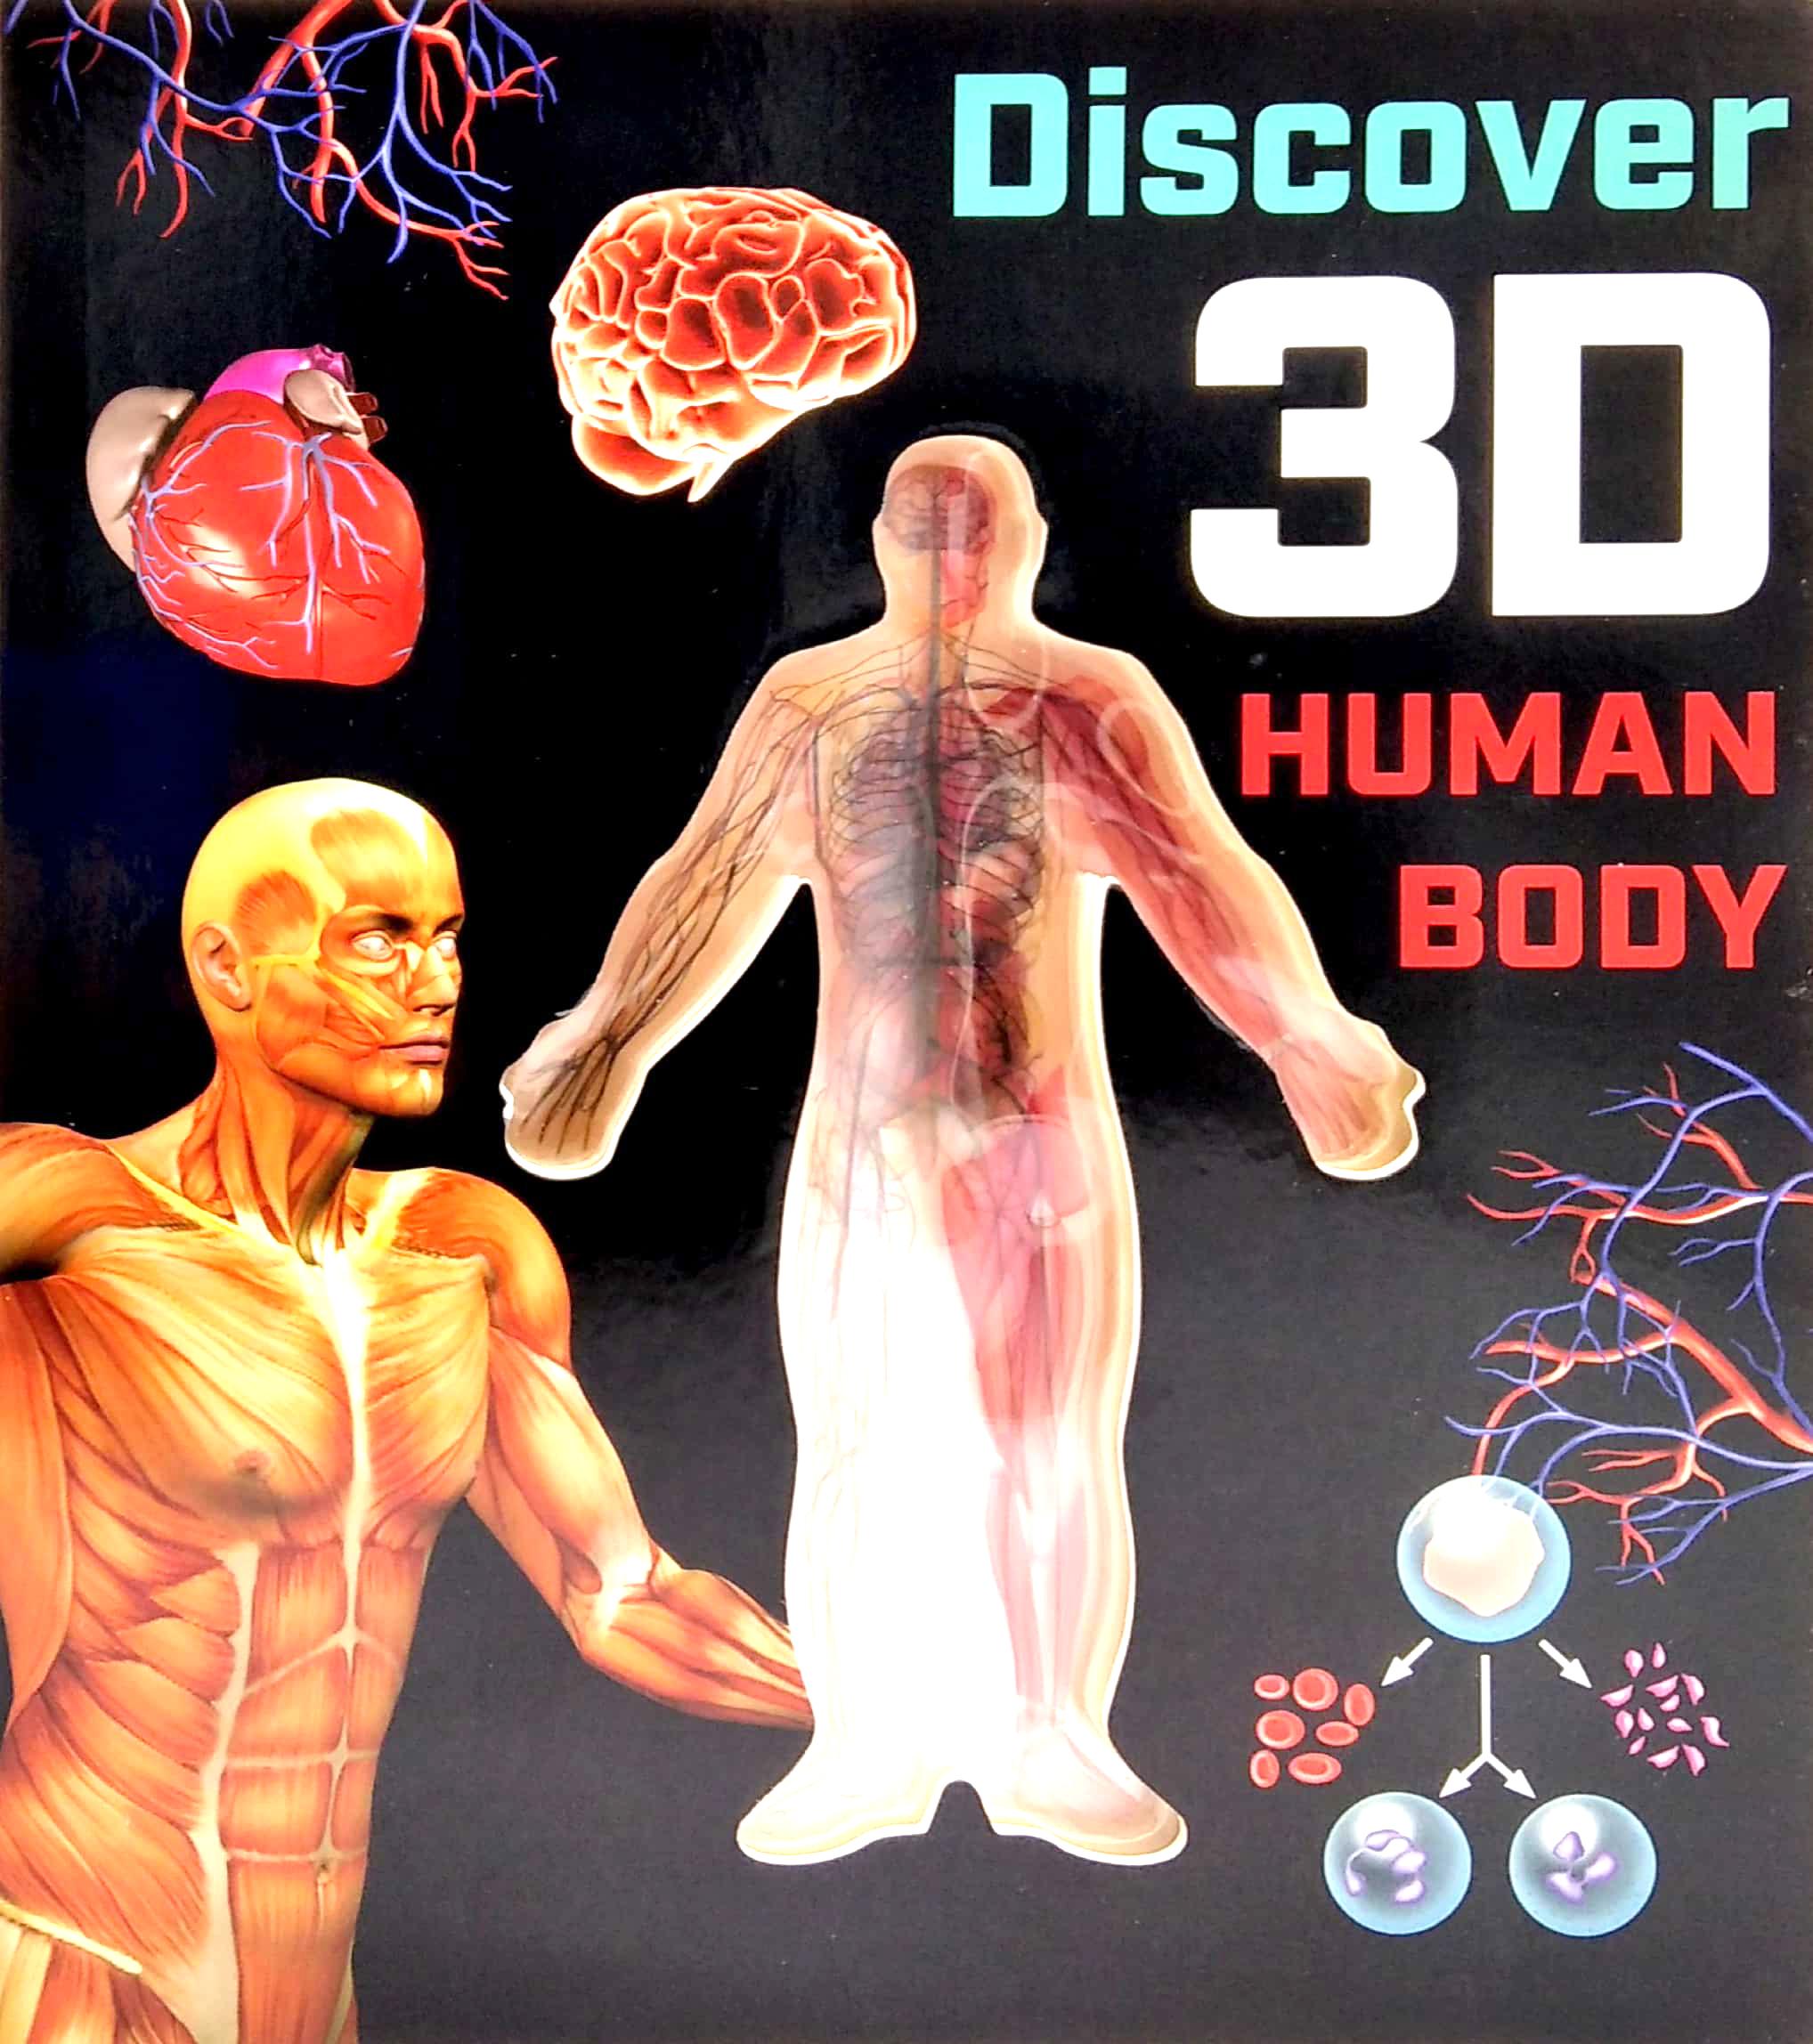 Discover 3D Human Body - Black Cover